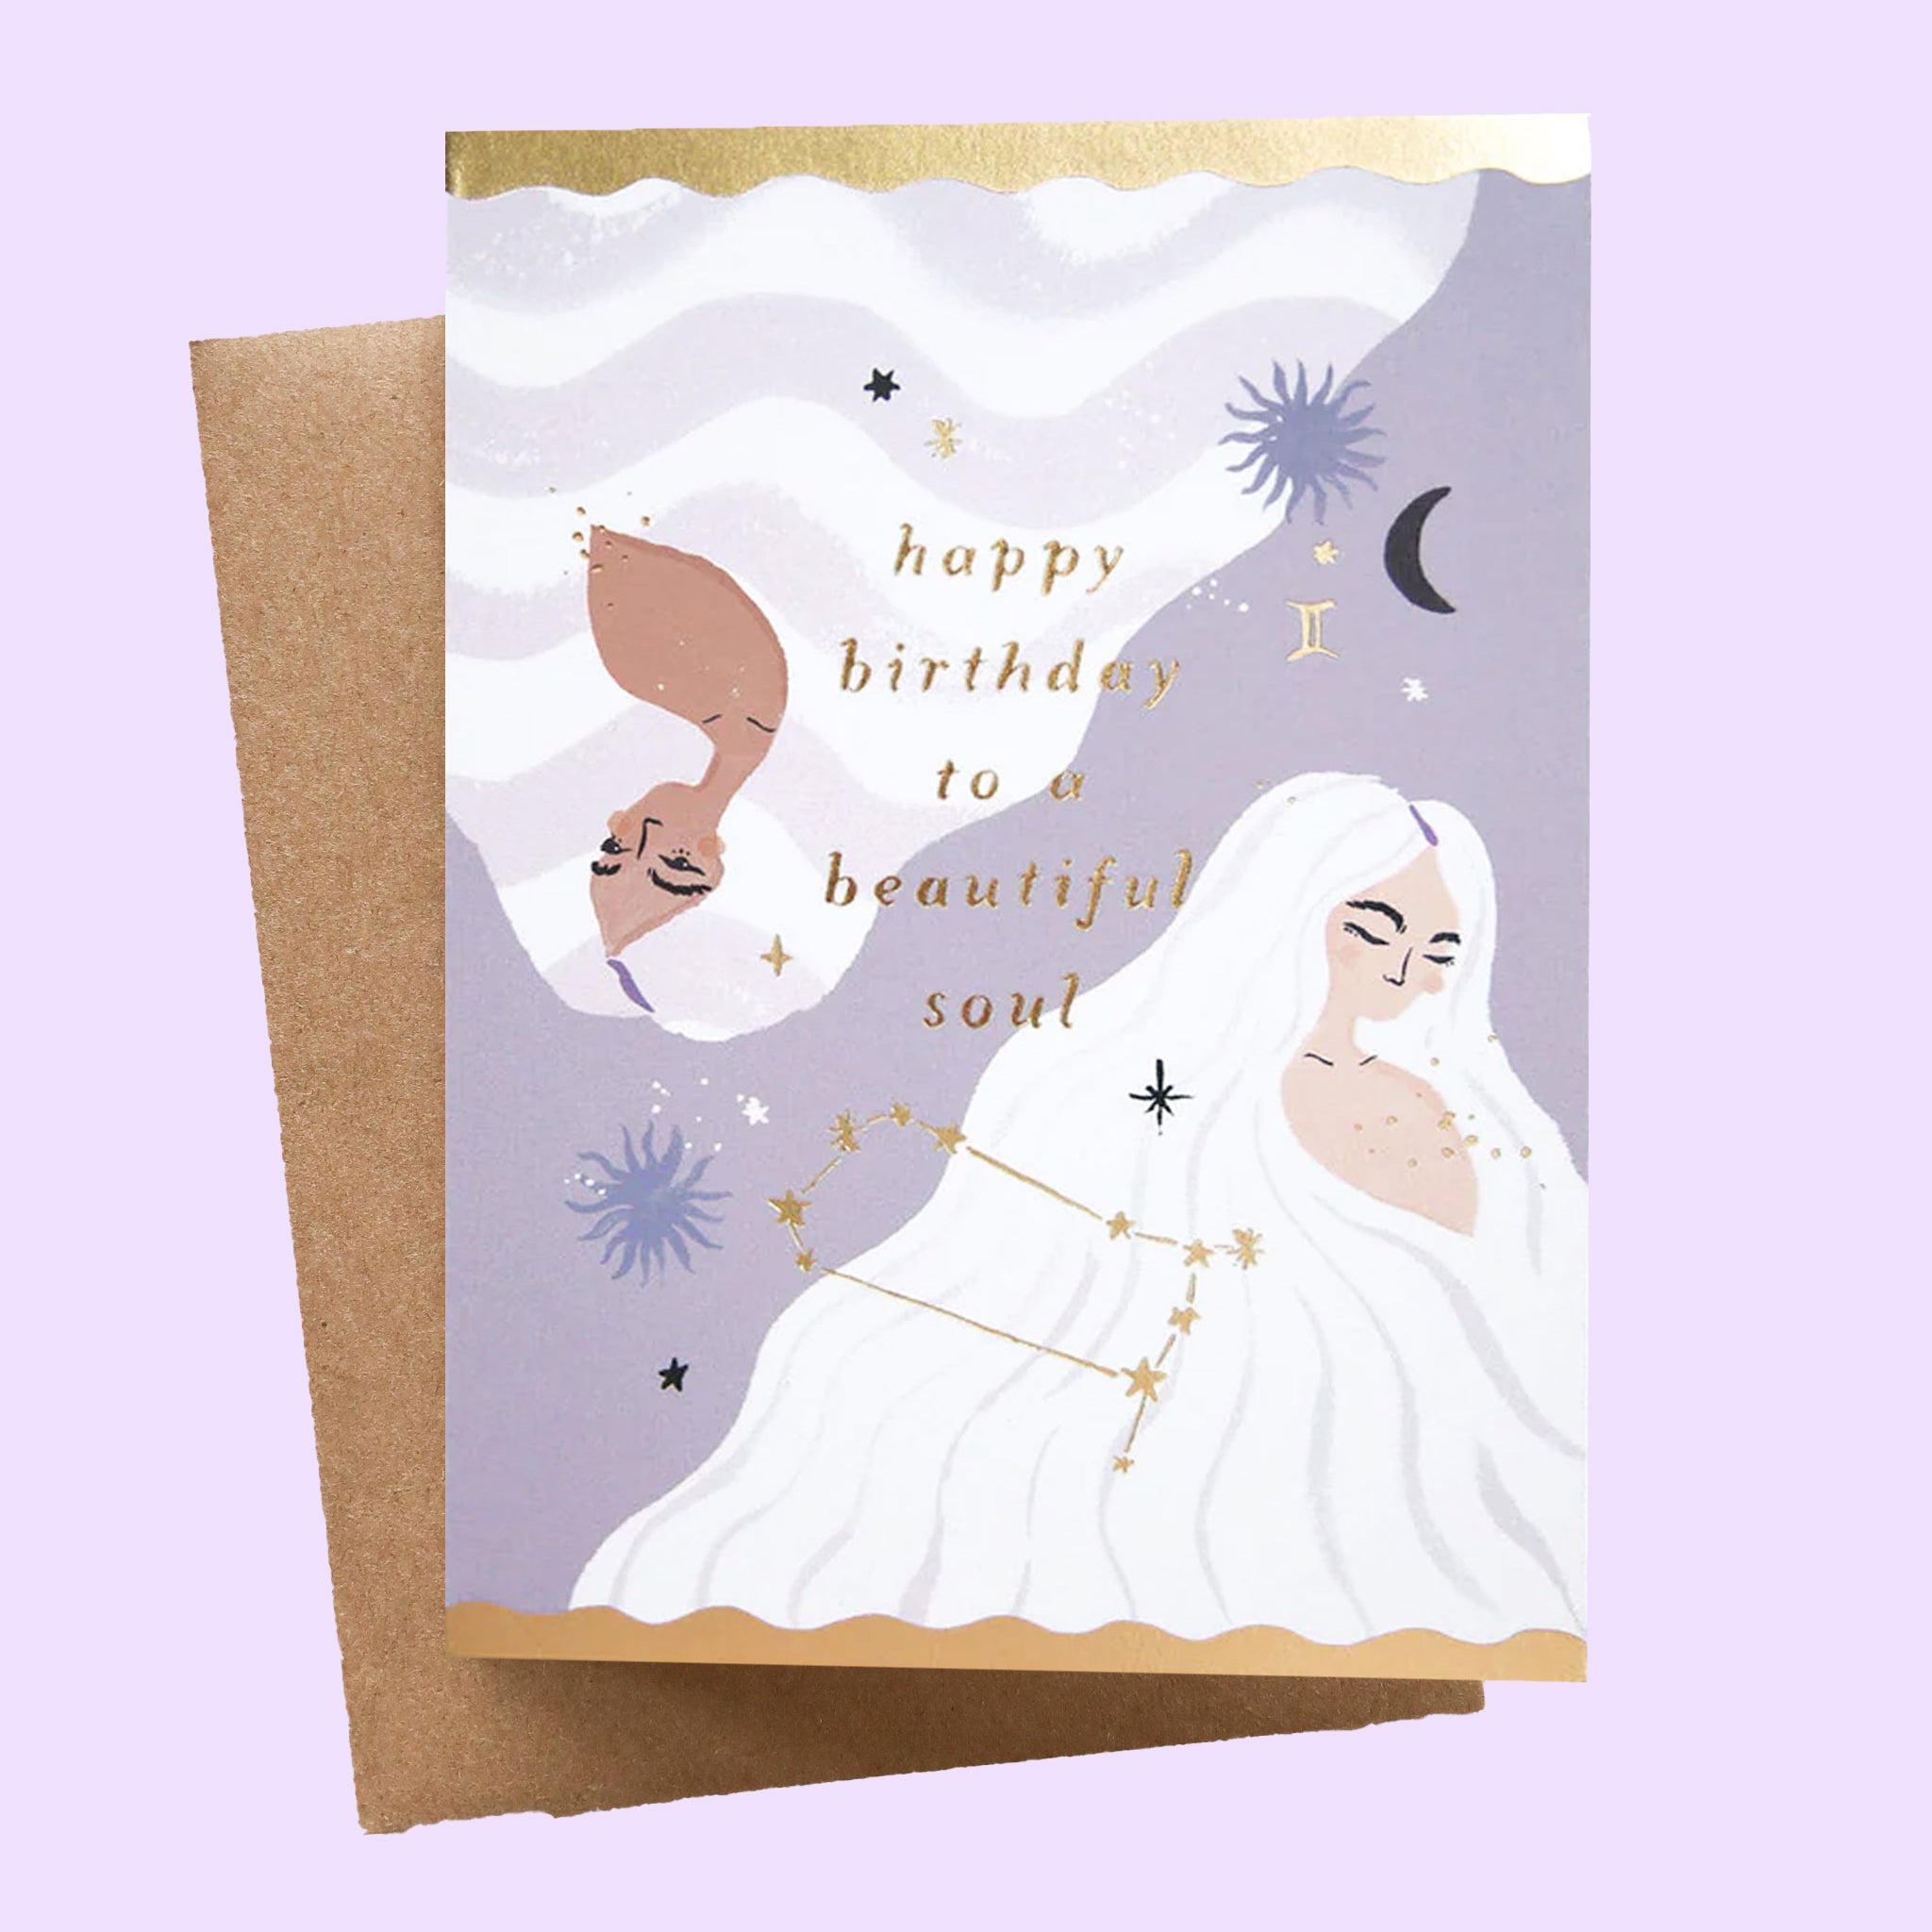 On a neutral background is a card with a woman on the front and gold text that reads, "happy birthday to a beautiful soul" along with star and moon illustrations.